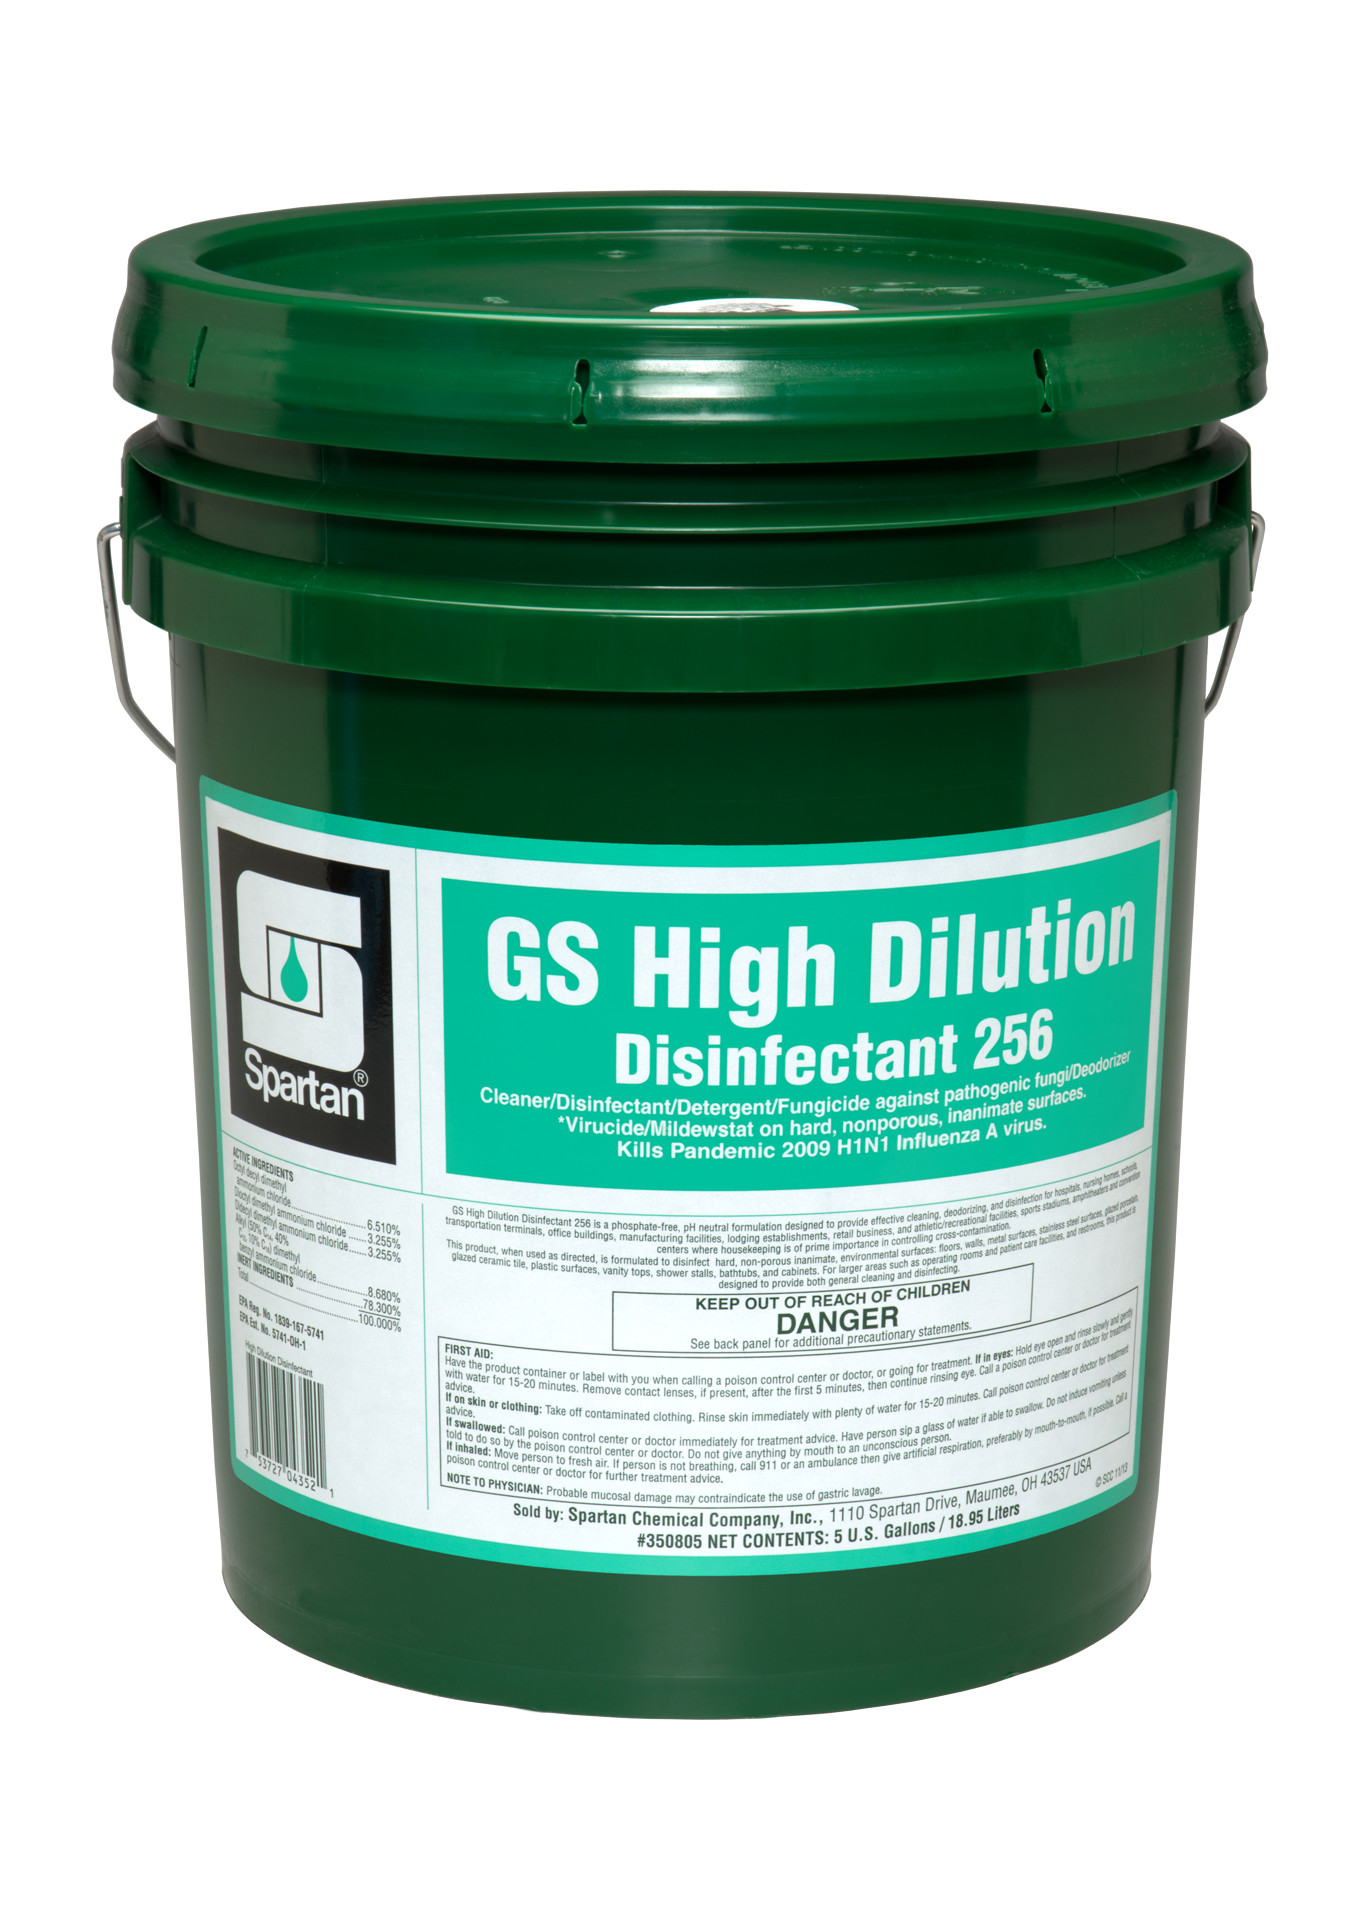 Spartan Chemical Company GS High Dilution Disinfectant 256, 5 GAL PAIL